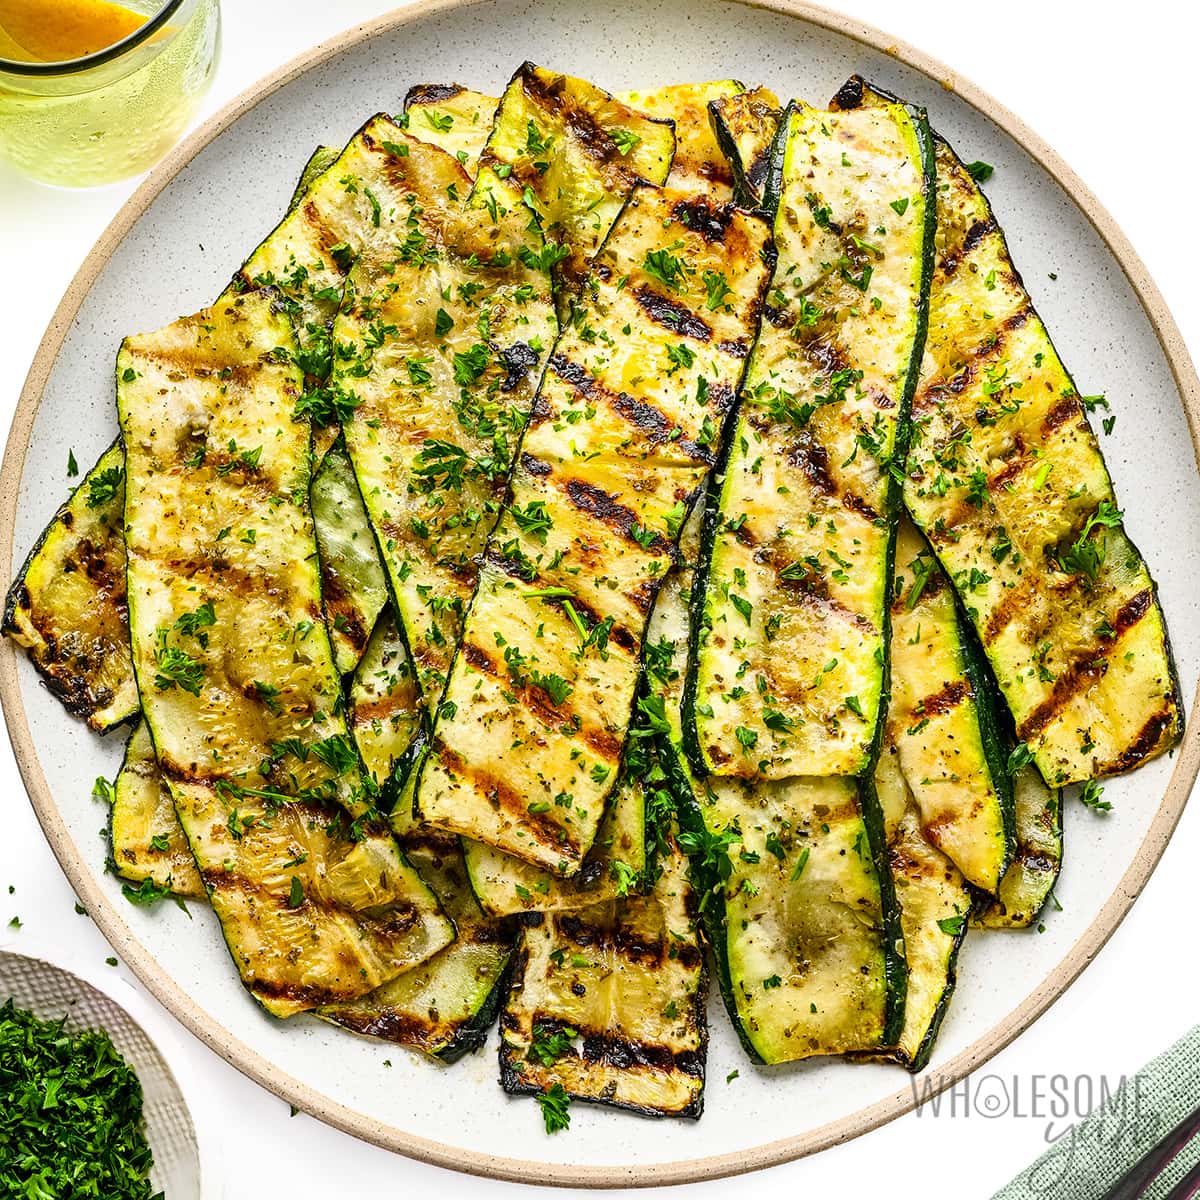 Grilled zucchini on a plate.